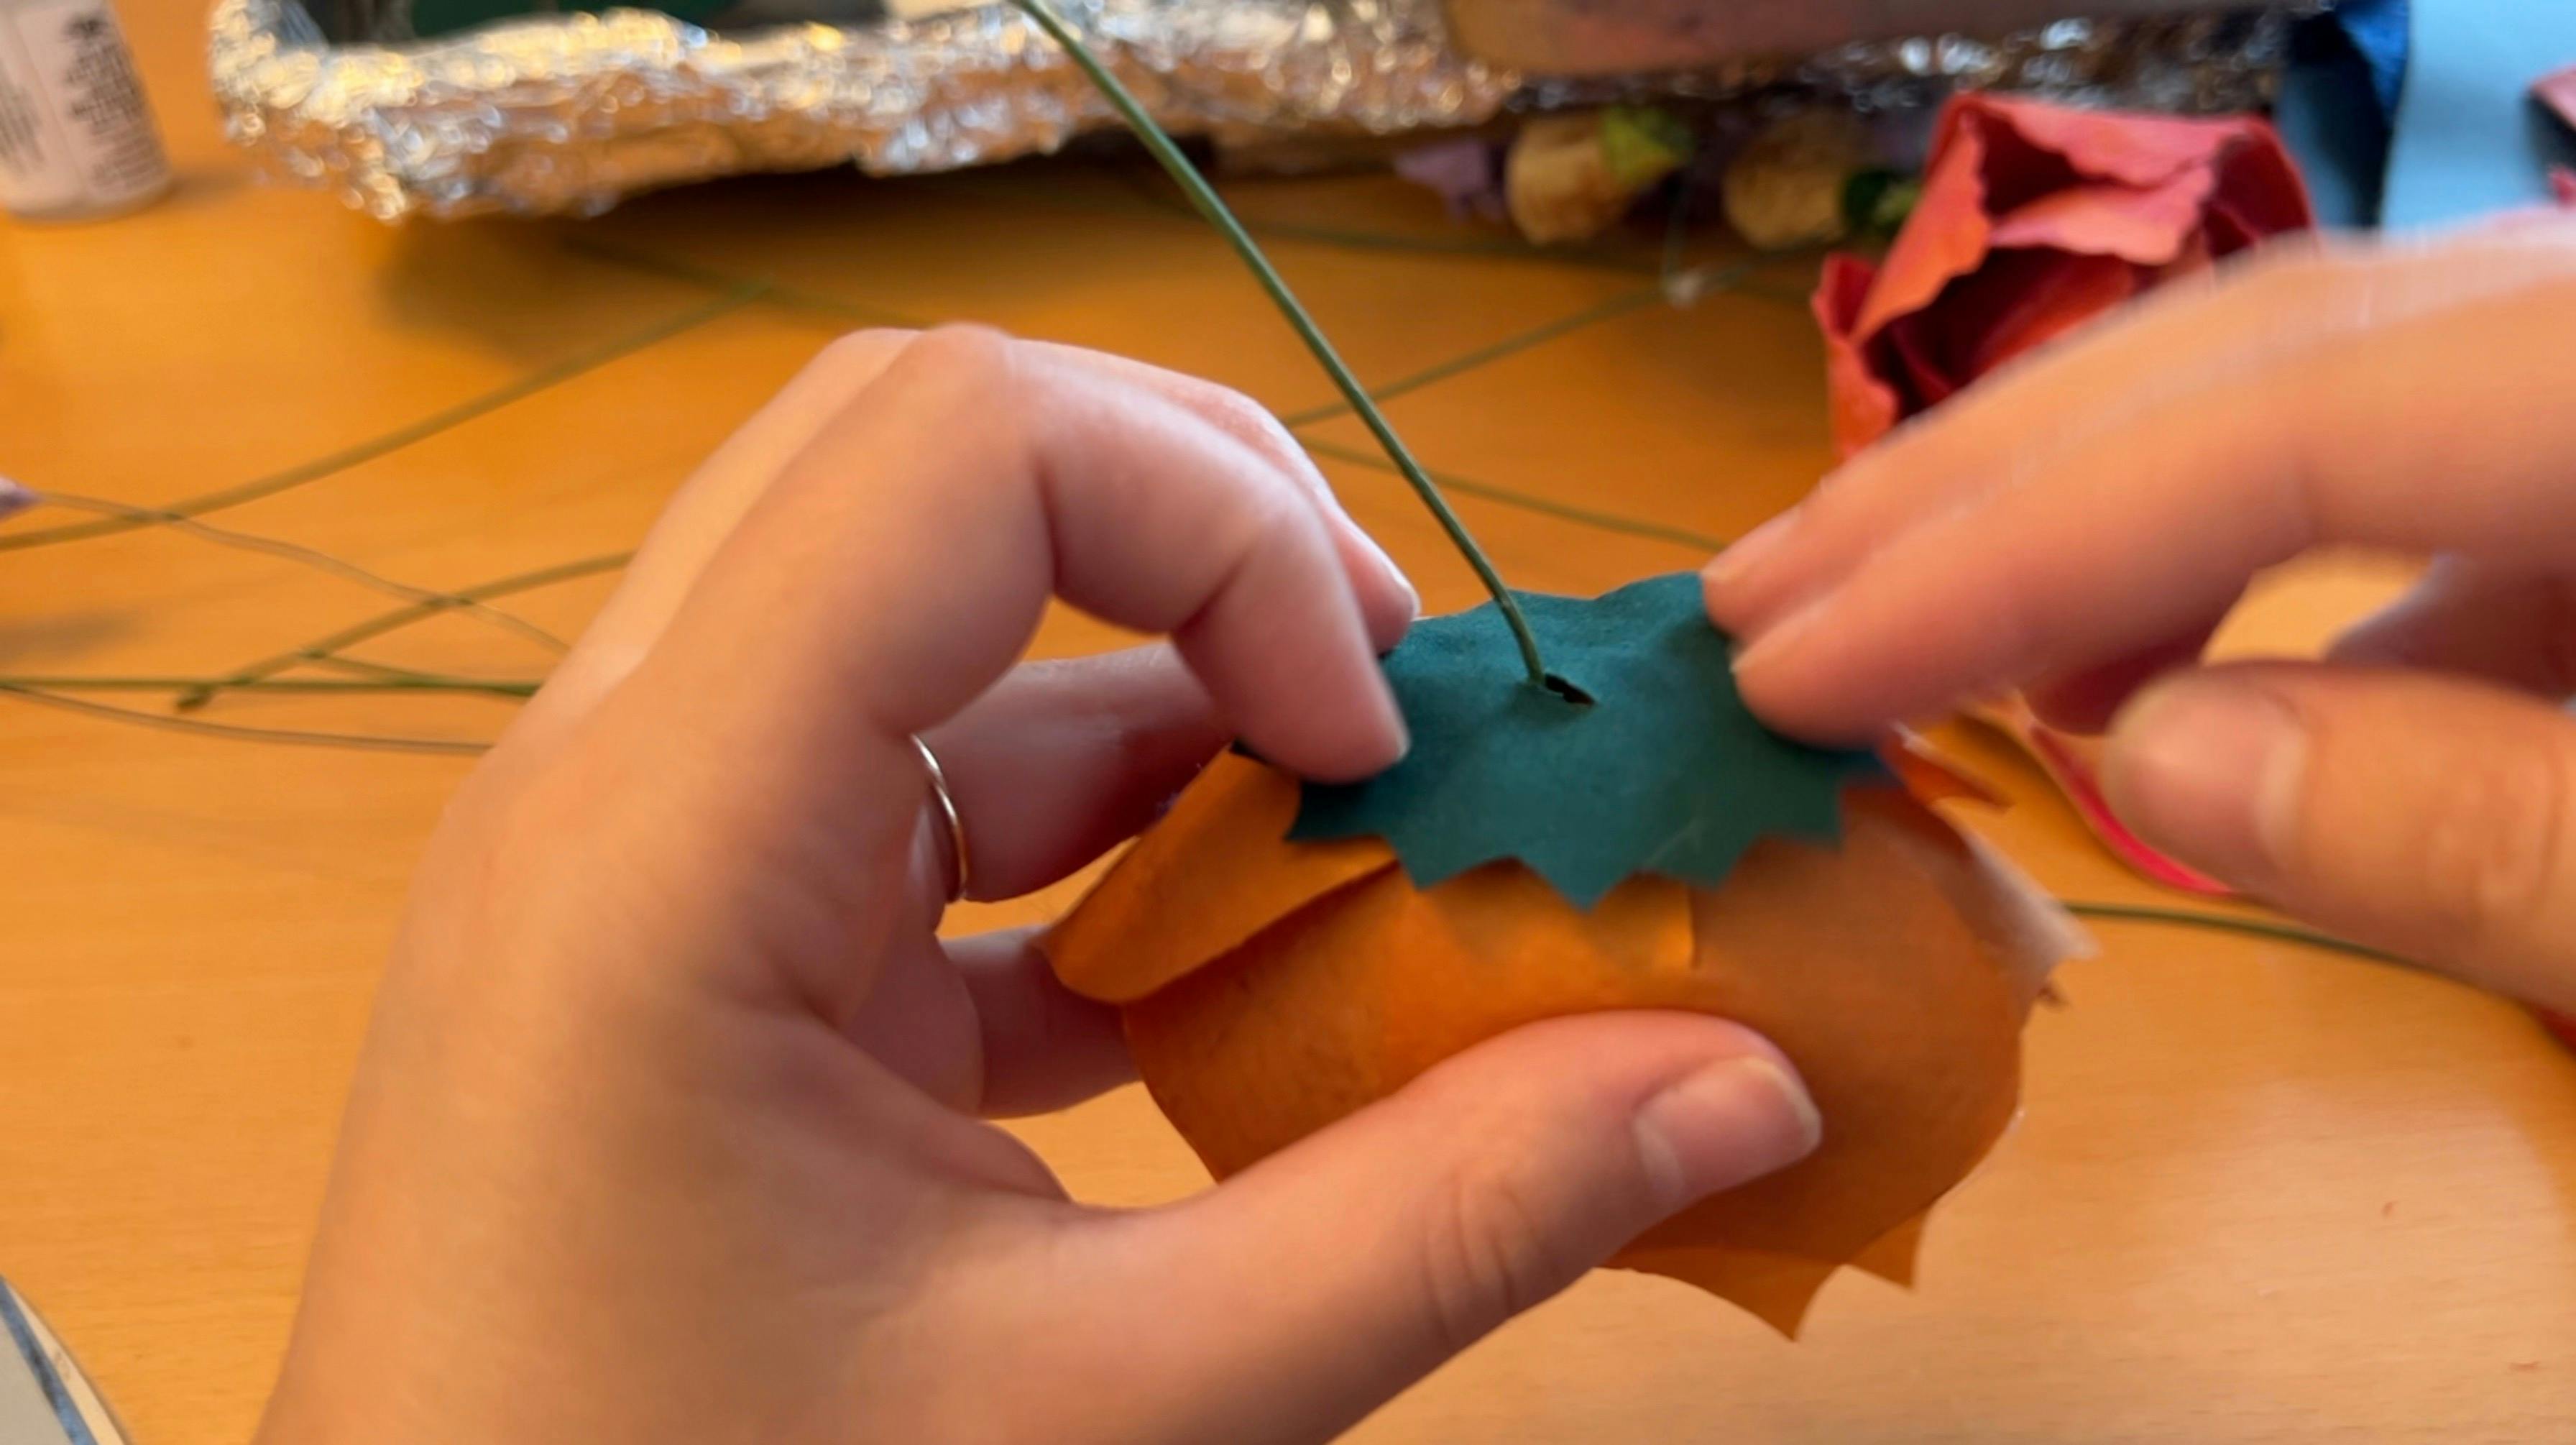 Gluing a green pointy circle on the bottom of an orange flower.